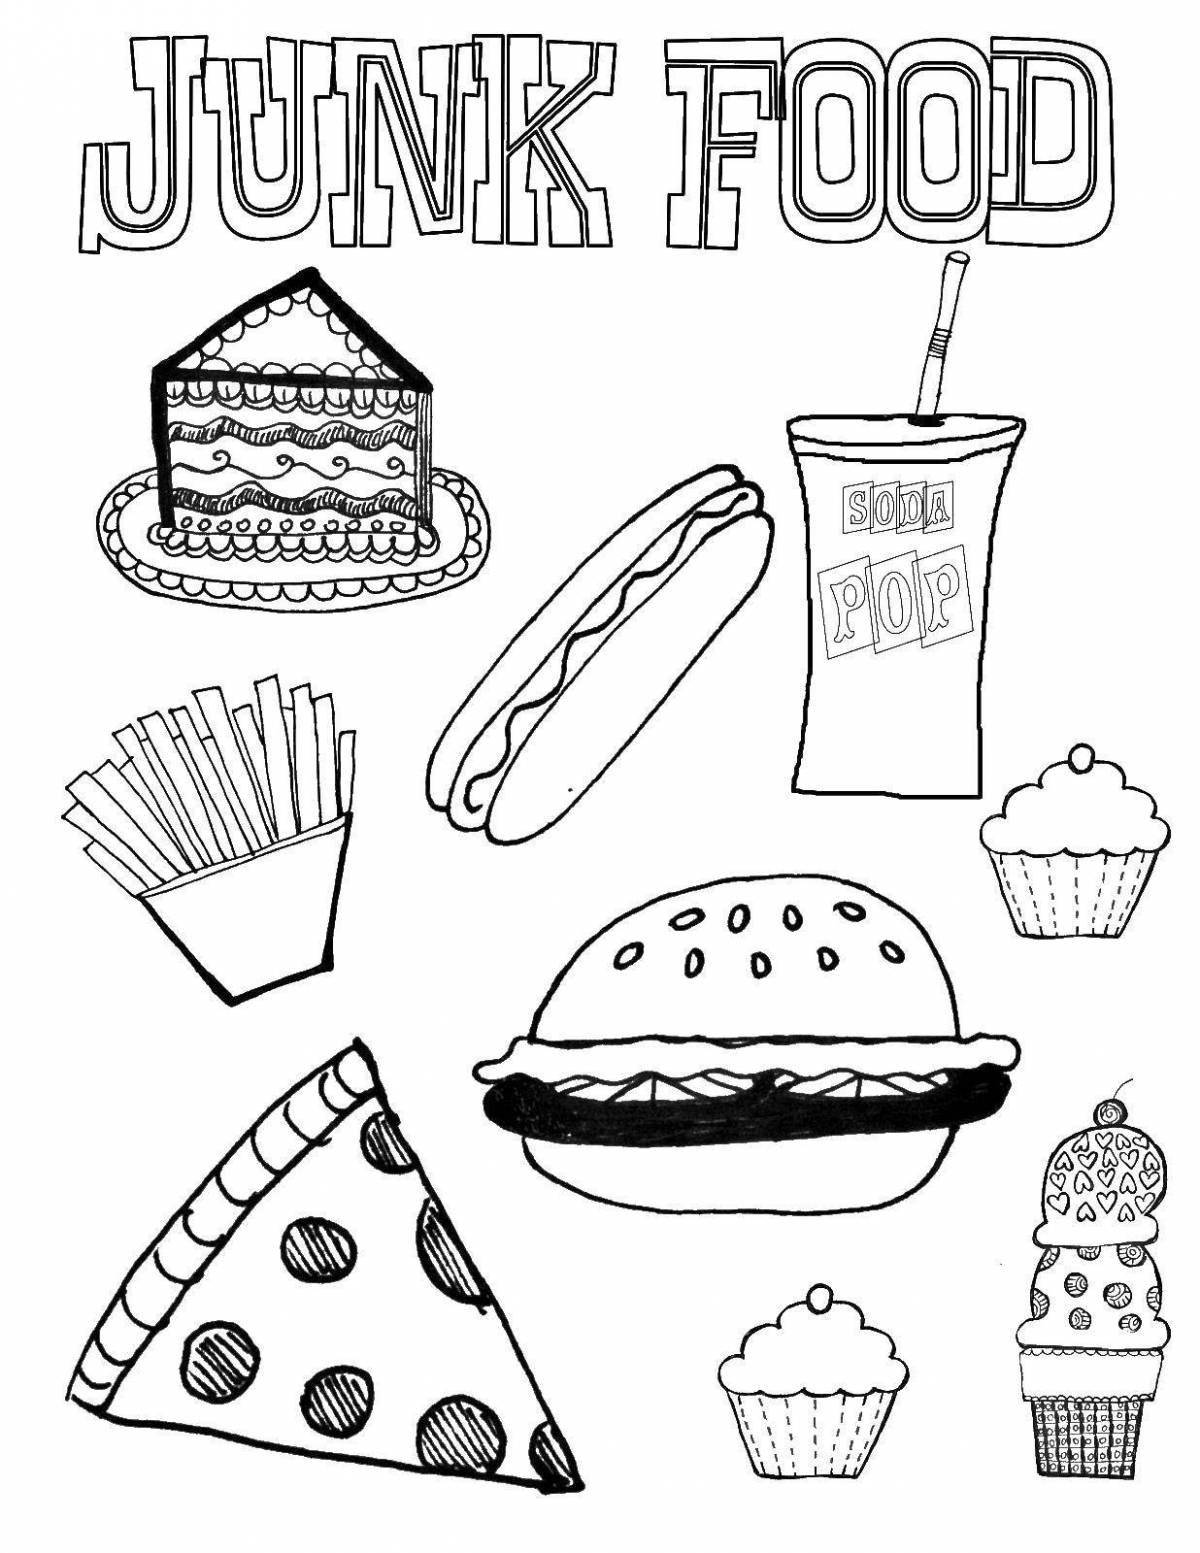 Attractive food coloring book for 6-7 year olds